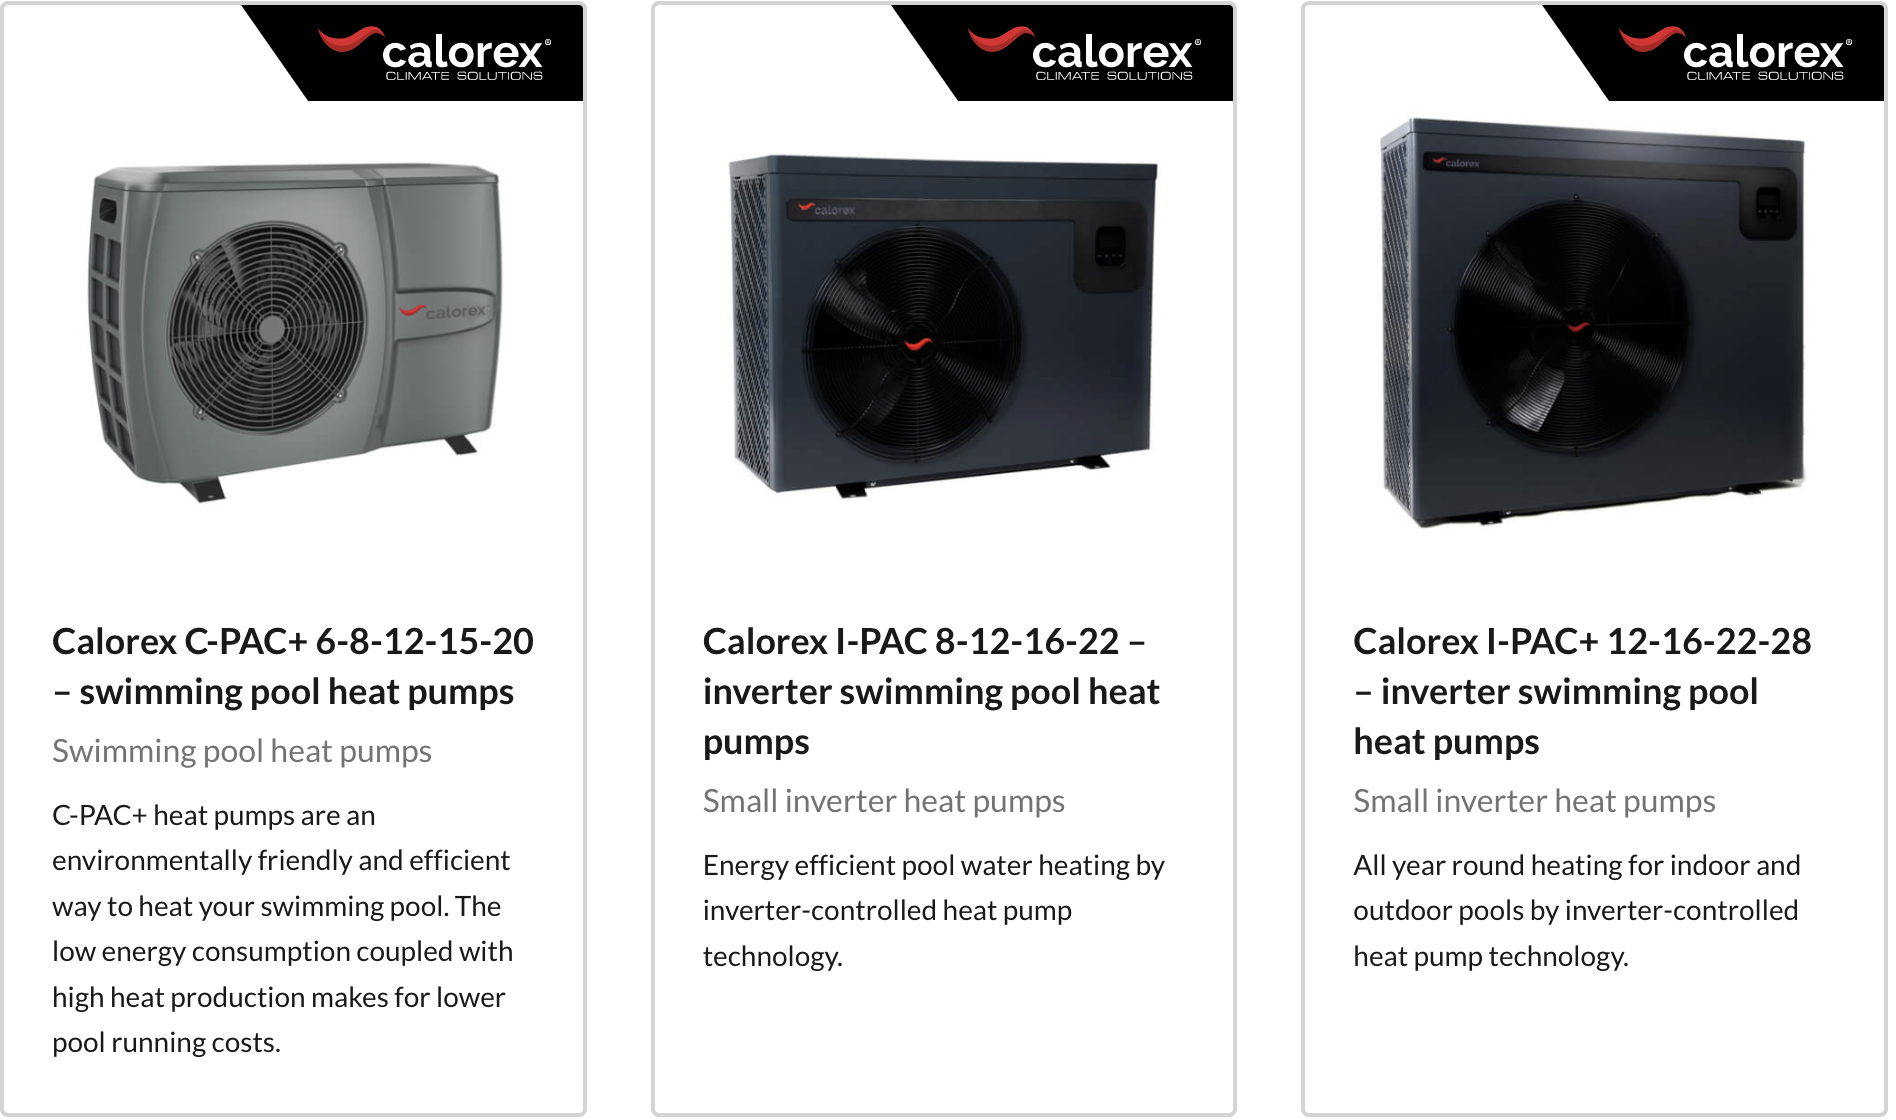 Calorex swimming pool air source heat pumps for residential swimming pools.